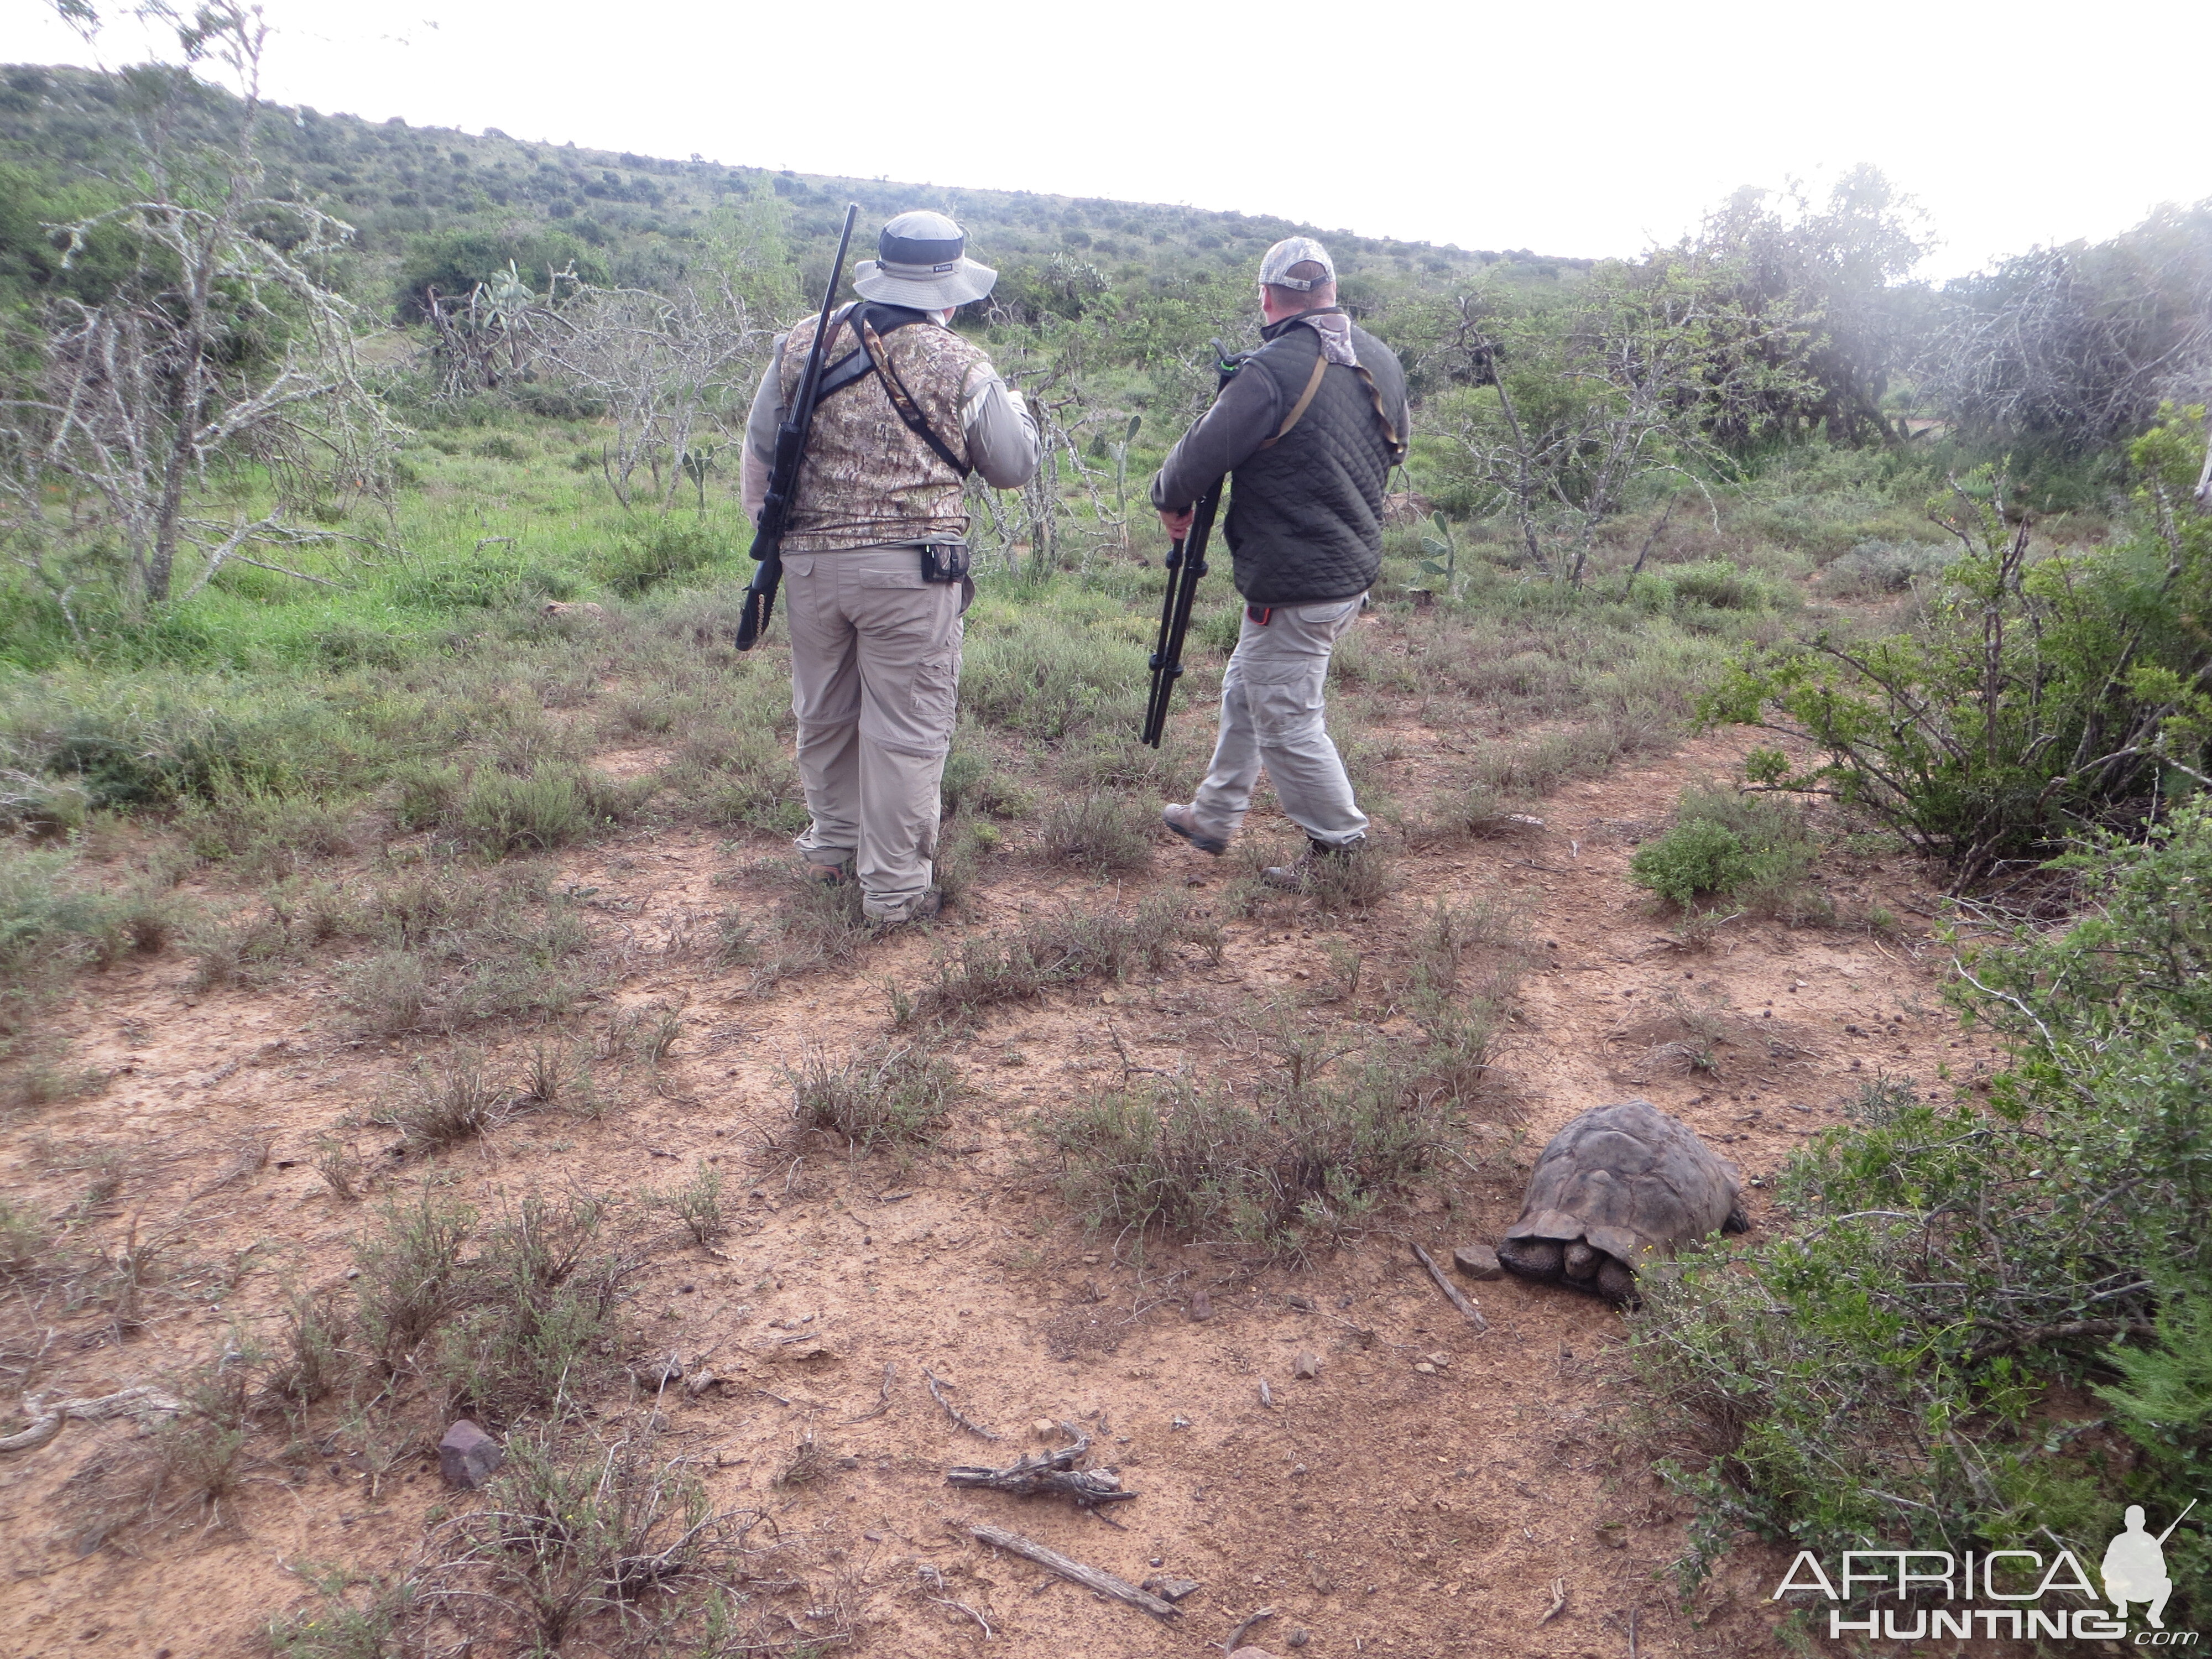 Leopard Tortoise shows up while we're stalking